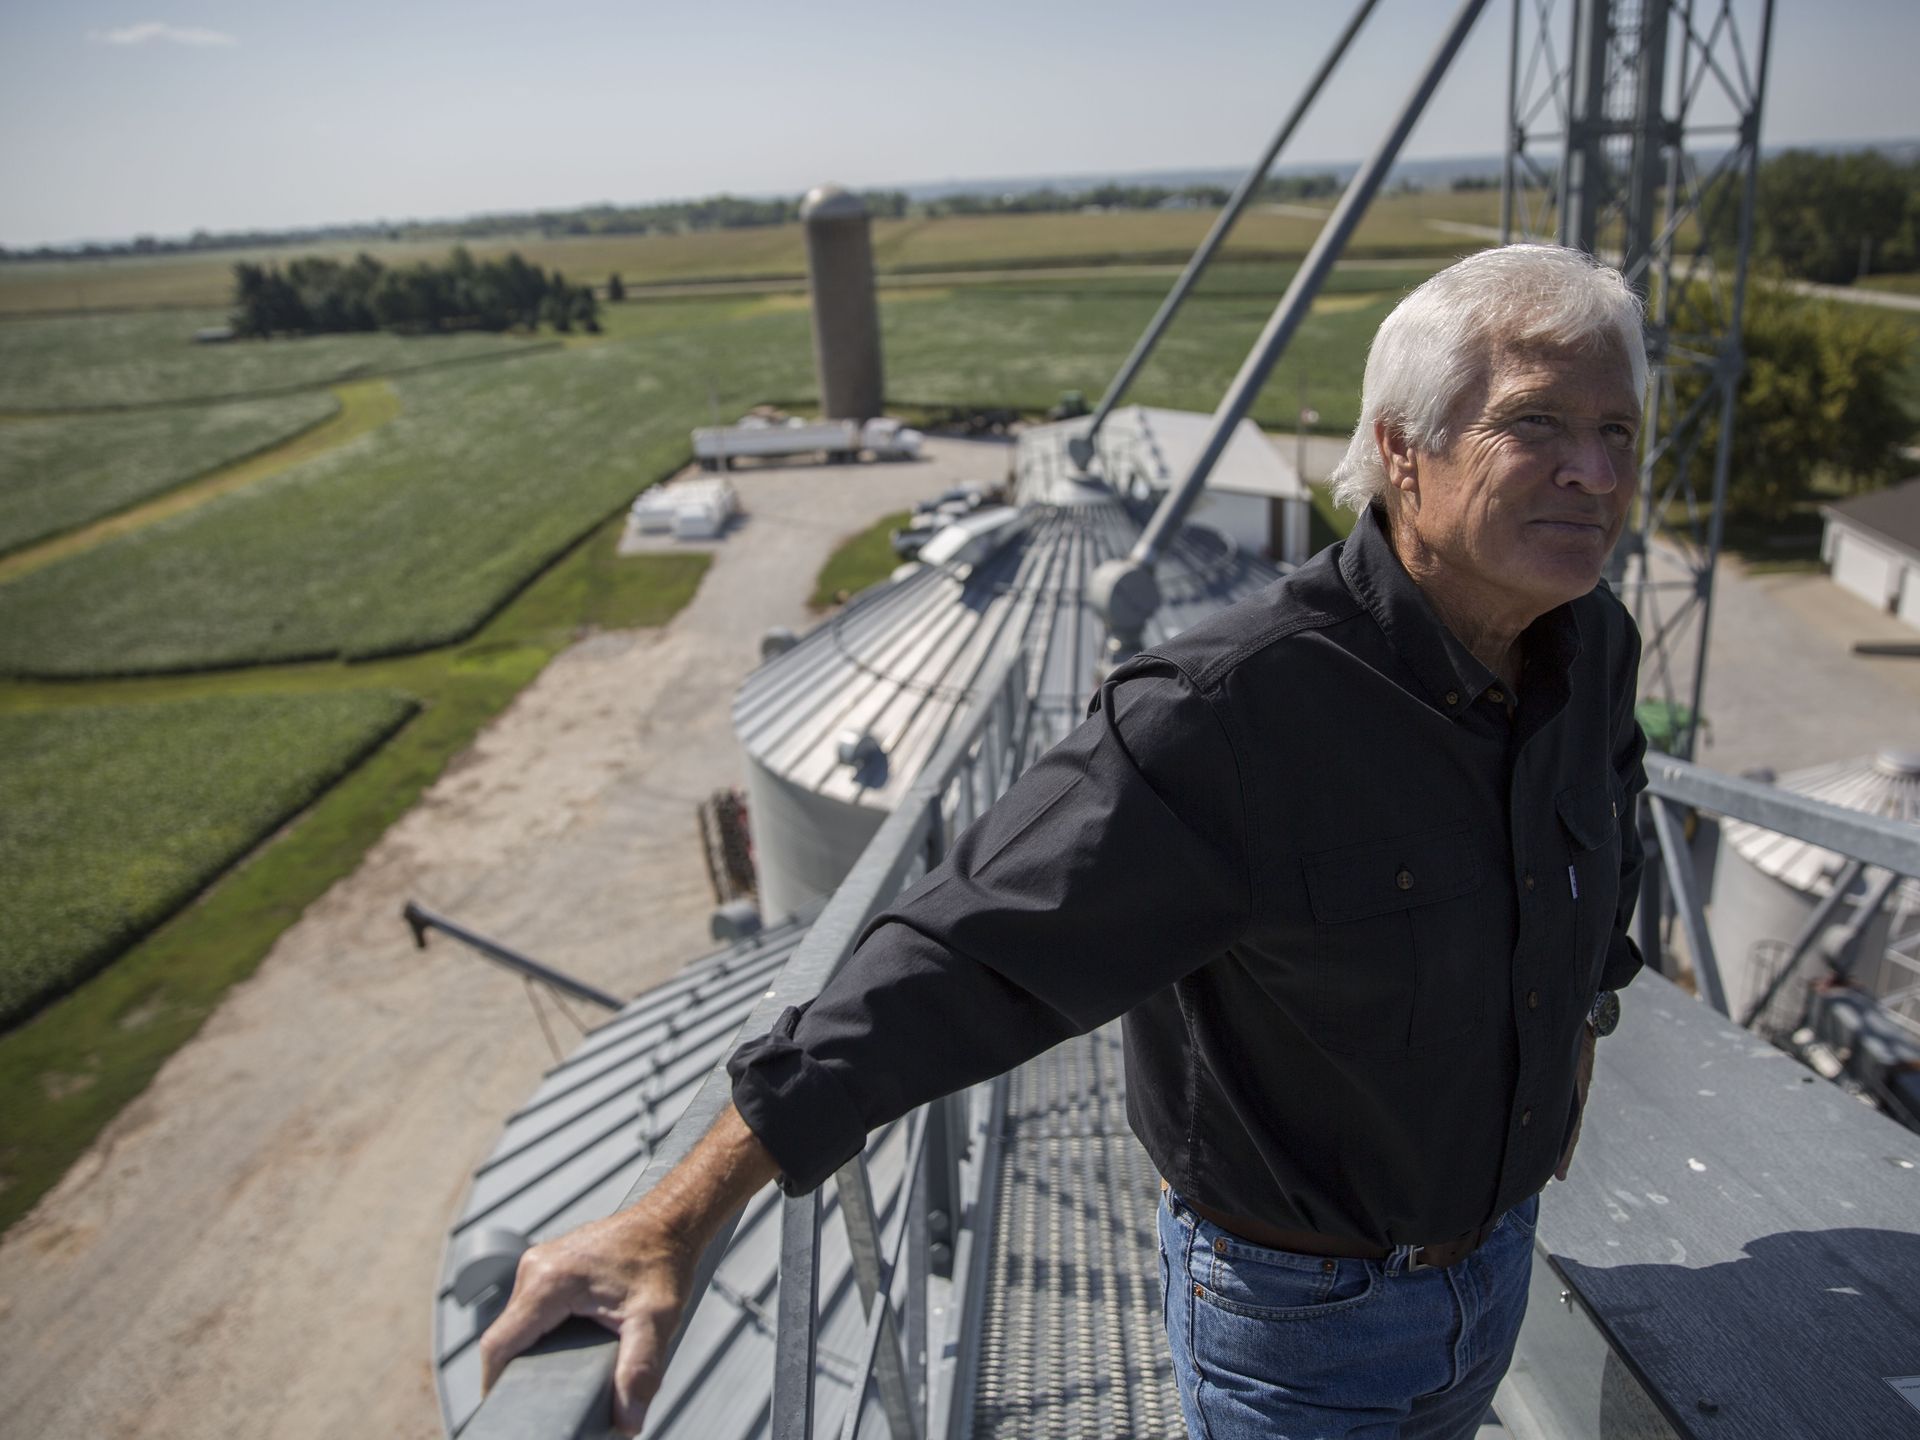 Rick Kimberley, a fifth generation family farmer of Maxwell, stands at the top of one of his grain bins on a late summer day, Tuesday, Sept. 5, 2017, in rural Polk County. Kimberley's farm is being used as a model for the China-US Demonstration Farm being built in China. Image by Kelsey Kremer.